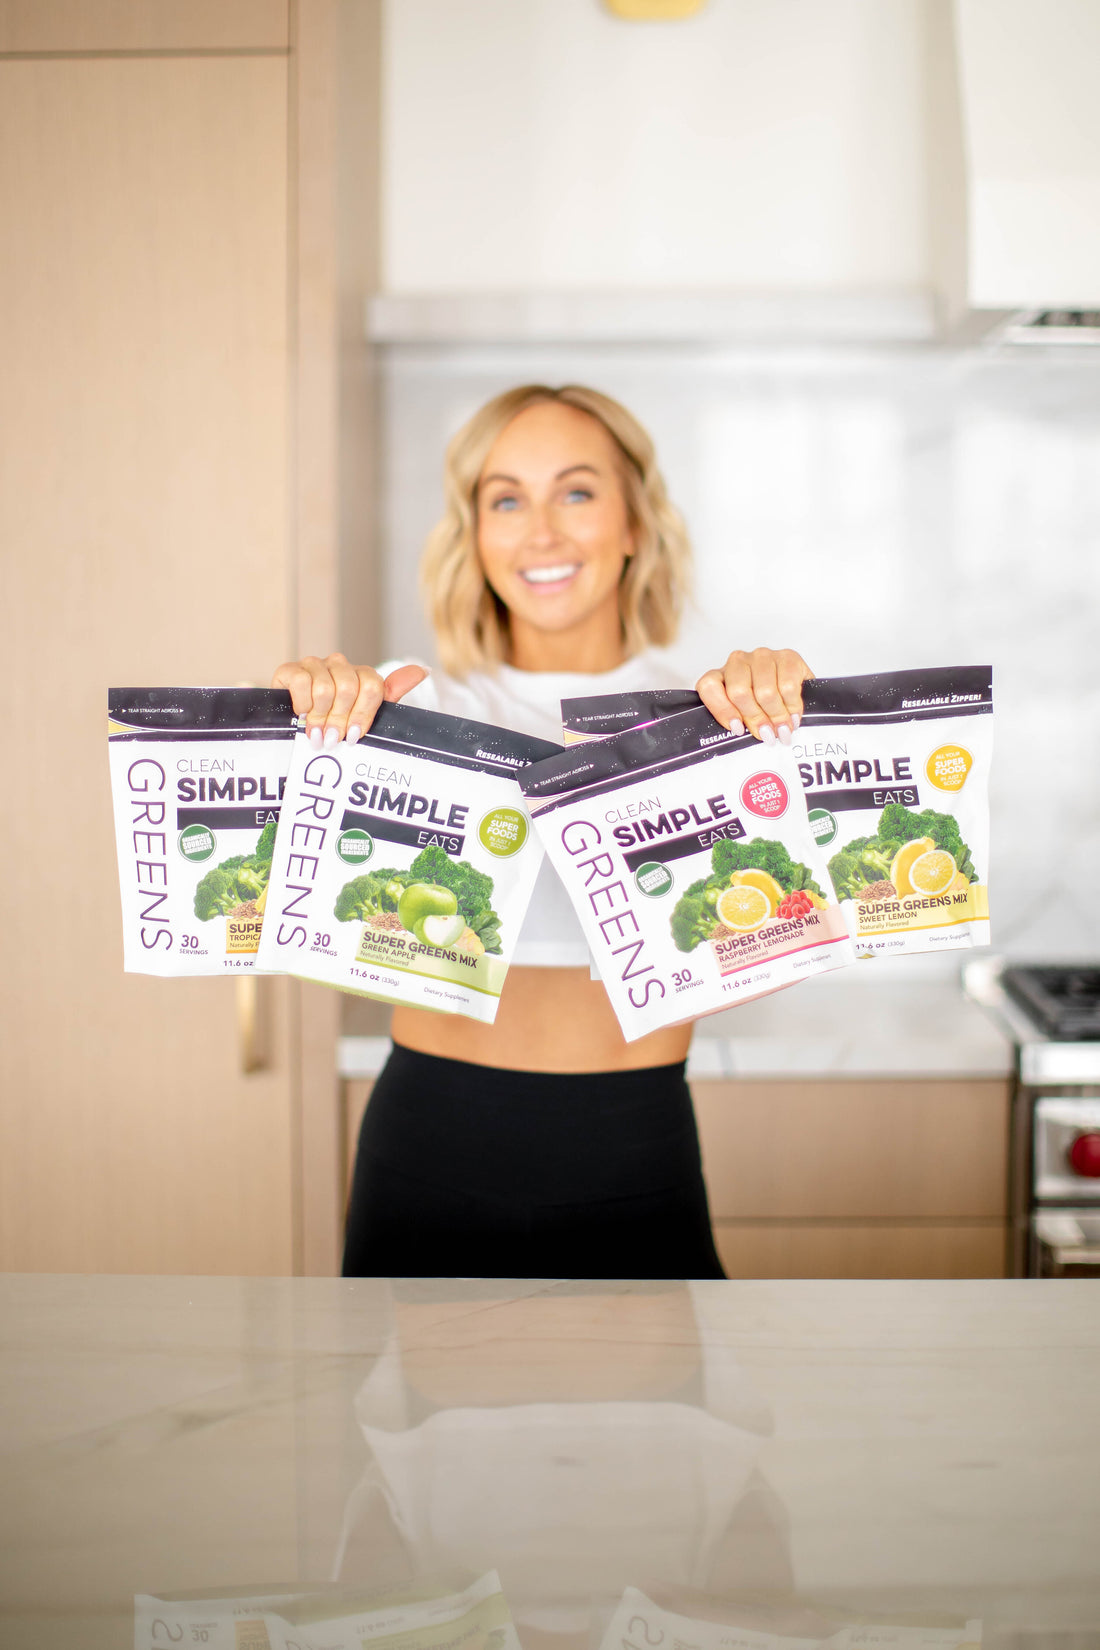 Clean Simple Eats Greens Mix Variety Pack